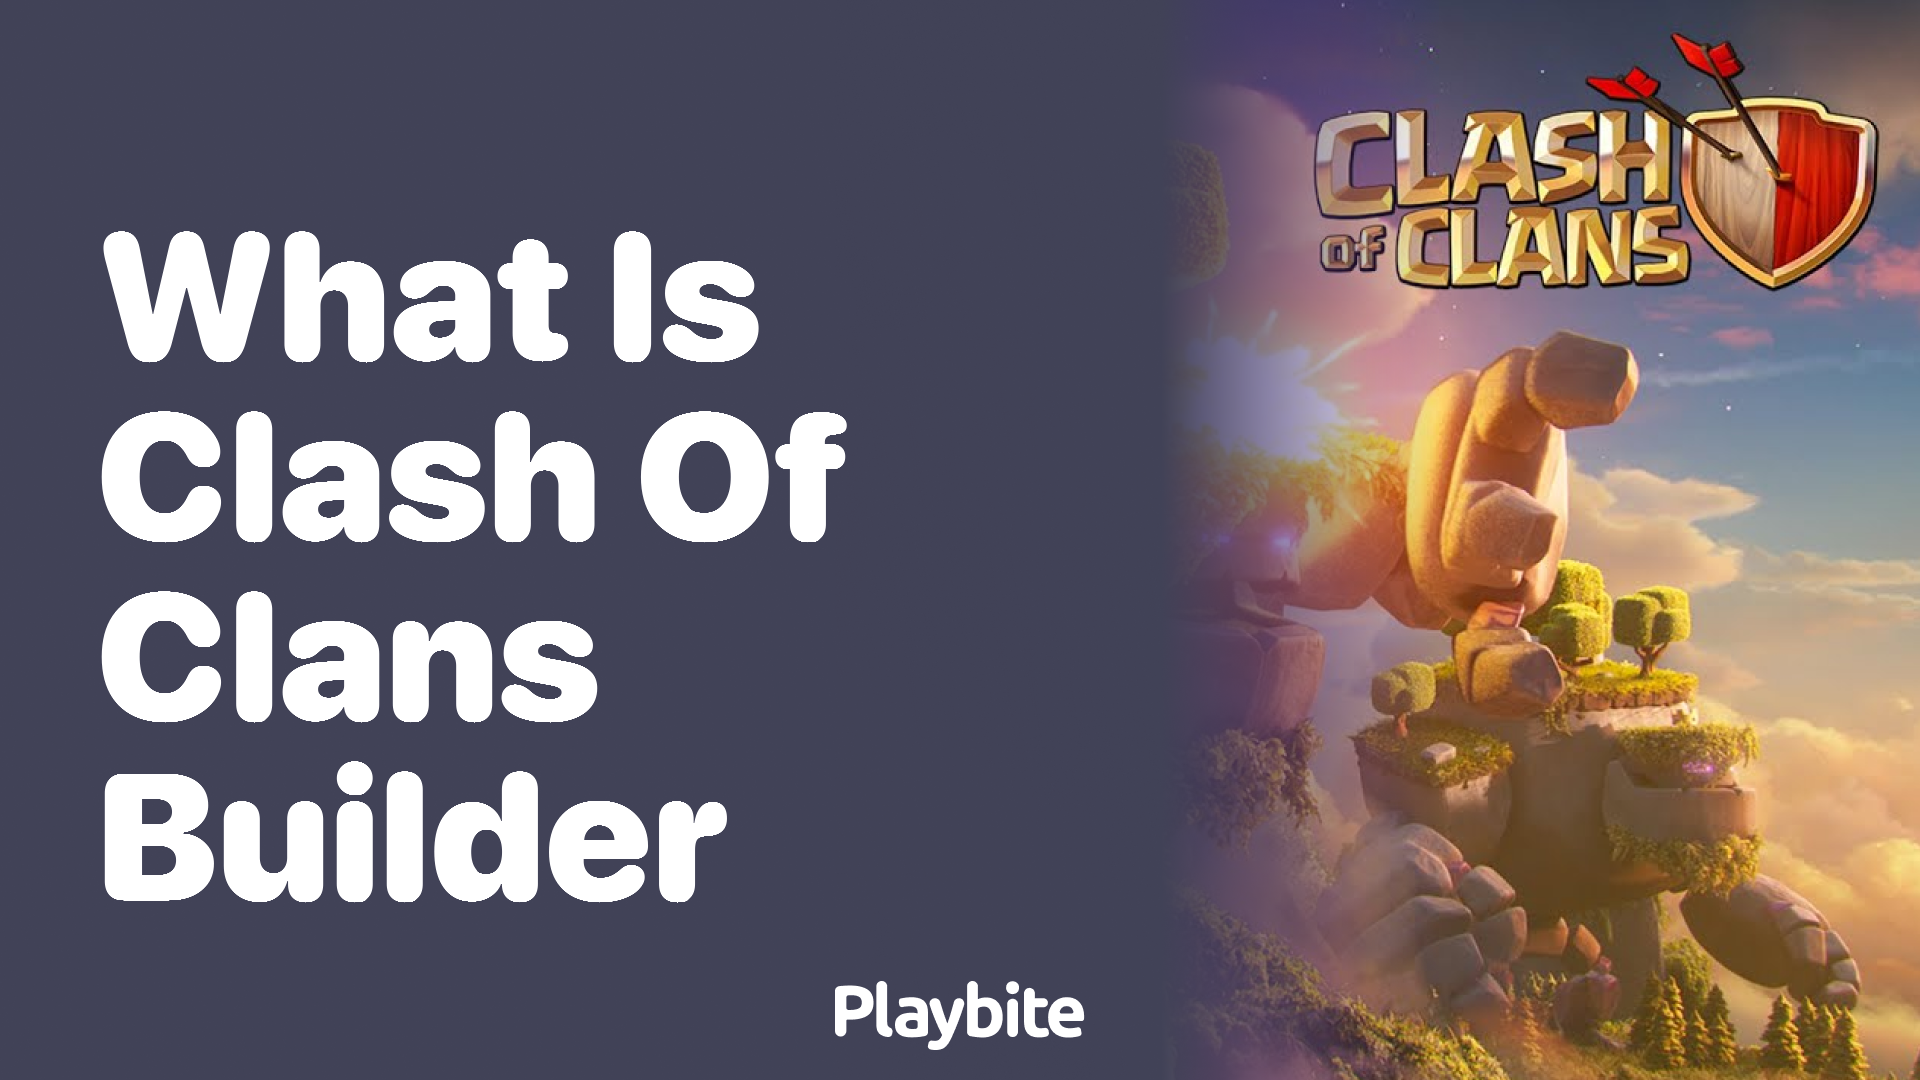 What is Clash of Clans Builder?